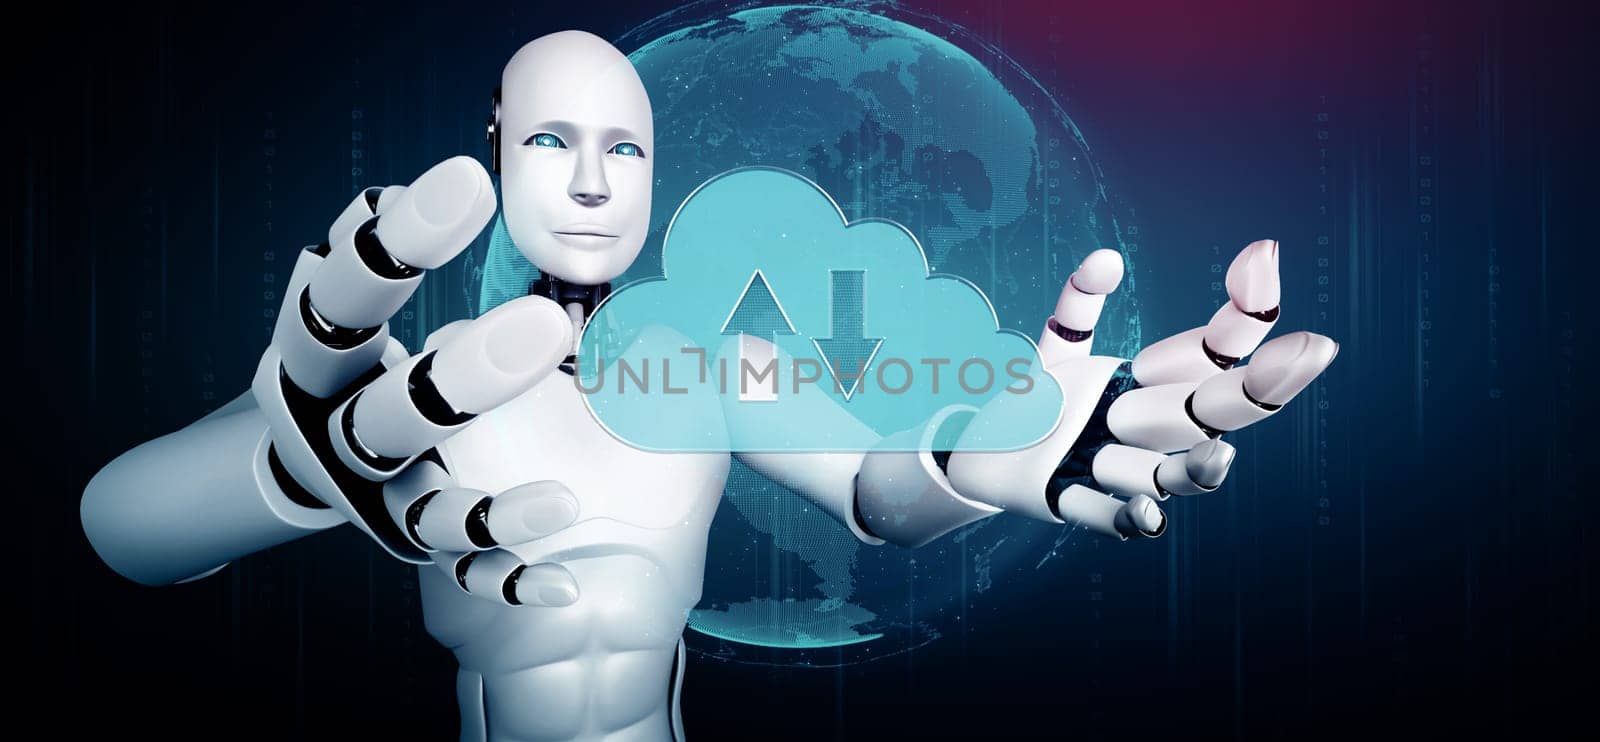 XAI 3d illustration AI robot using cloud computing technology to store data on online server. Futuristic concept of cloud information storage analyzed by machine learning process. 3D rendering illustration.